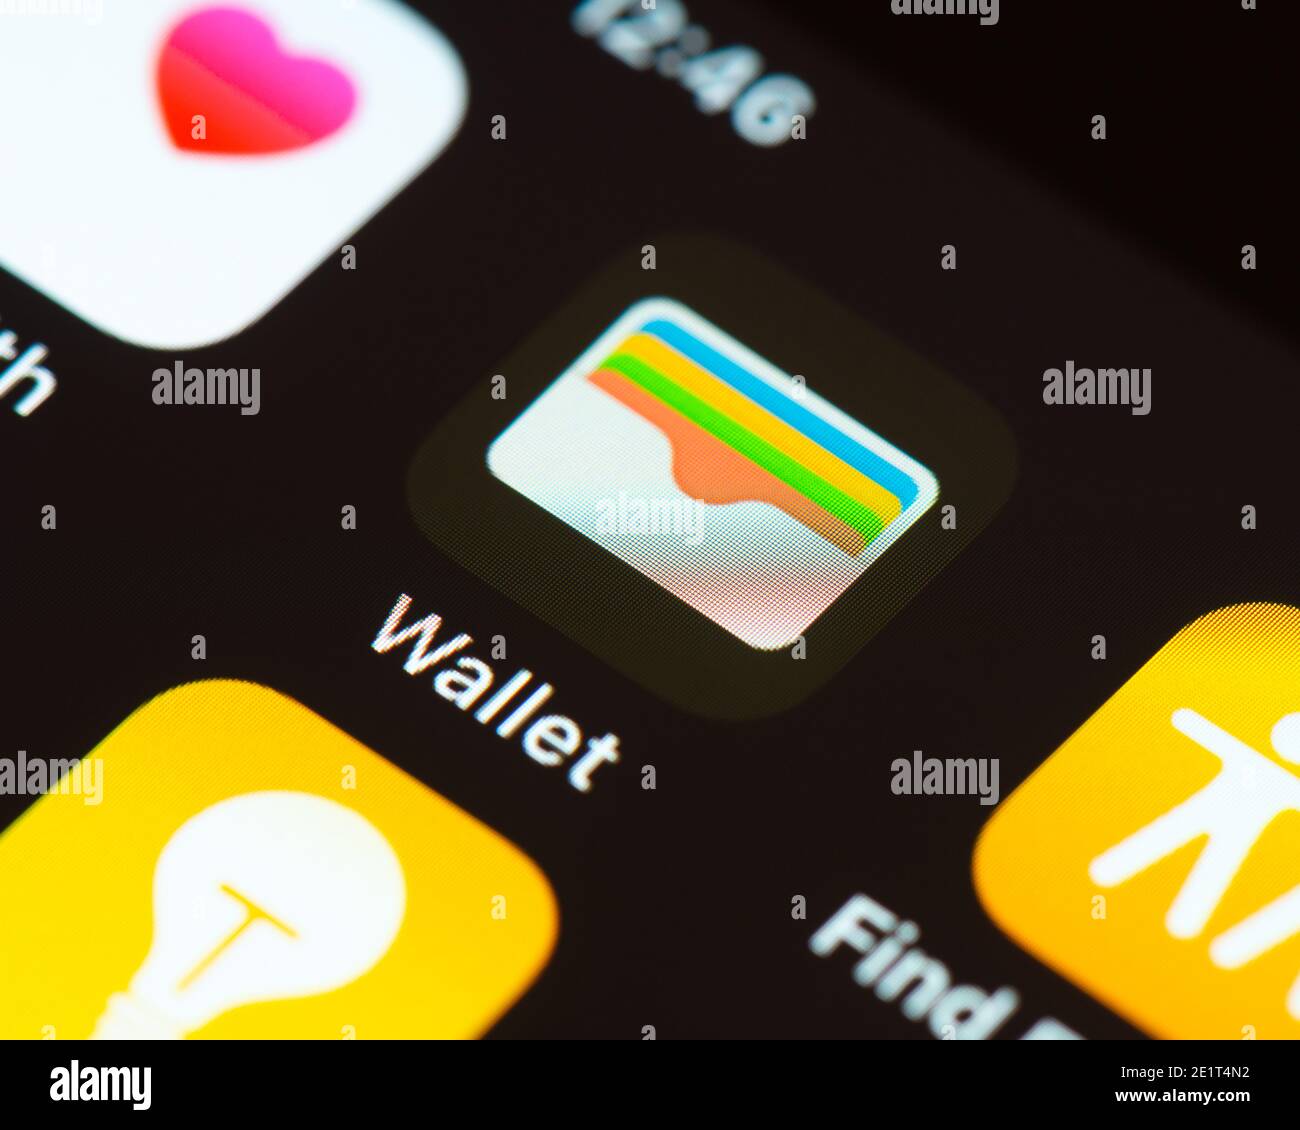 Wallet app icon on Apple iPhone screen Stock Photo